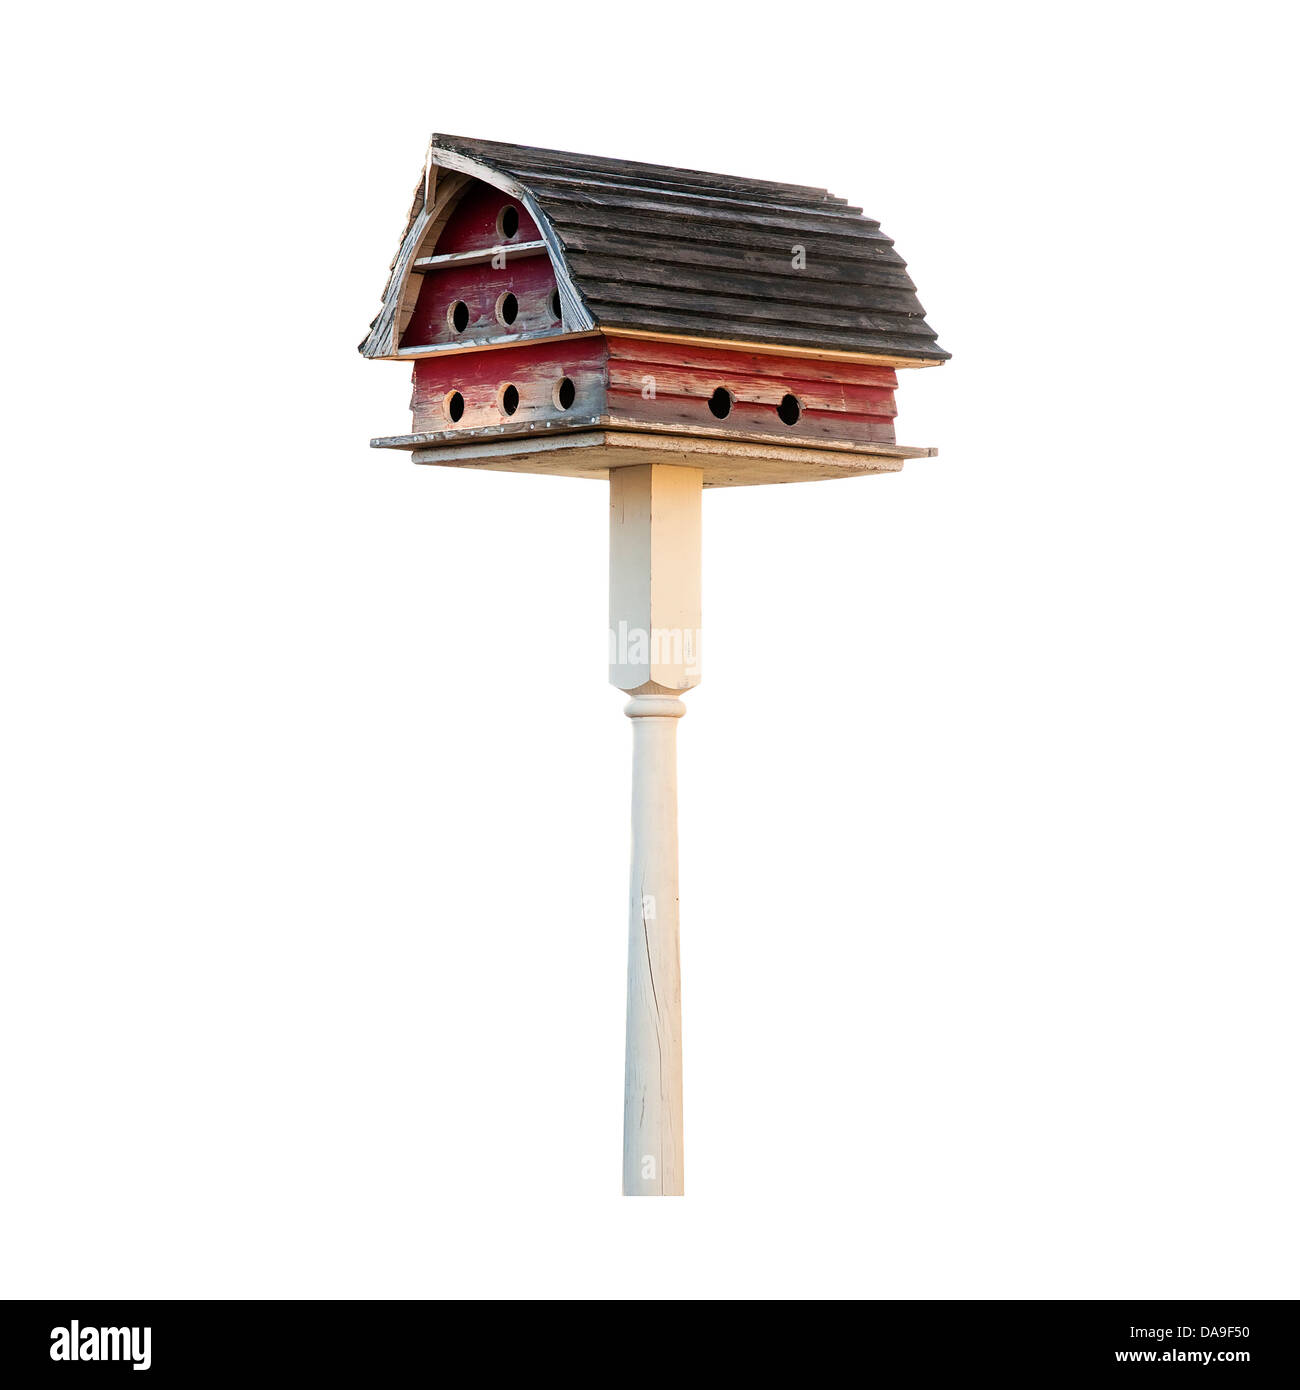 Purple Martin birdhouse made to look like a barn with a Gambrel roof. Isolated on white with a clipping path. Stock Photo